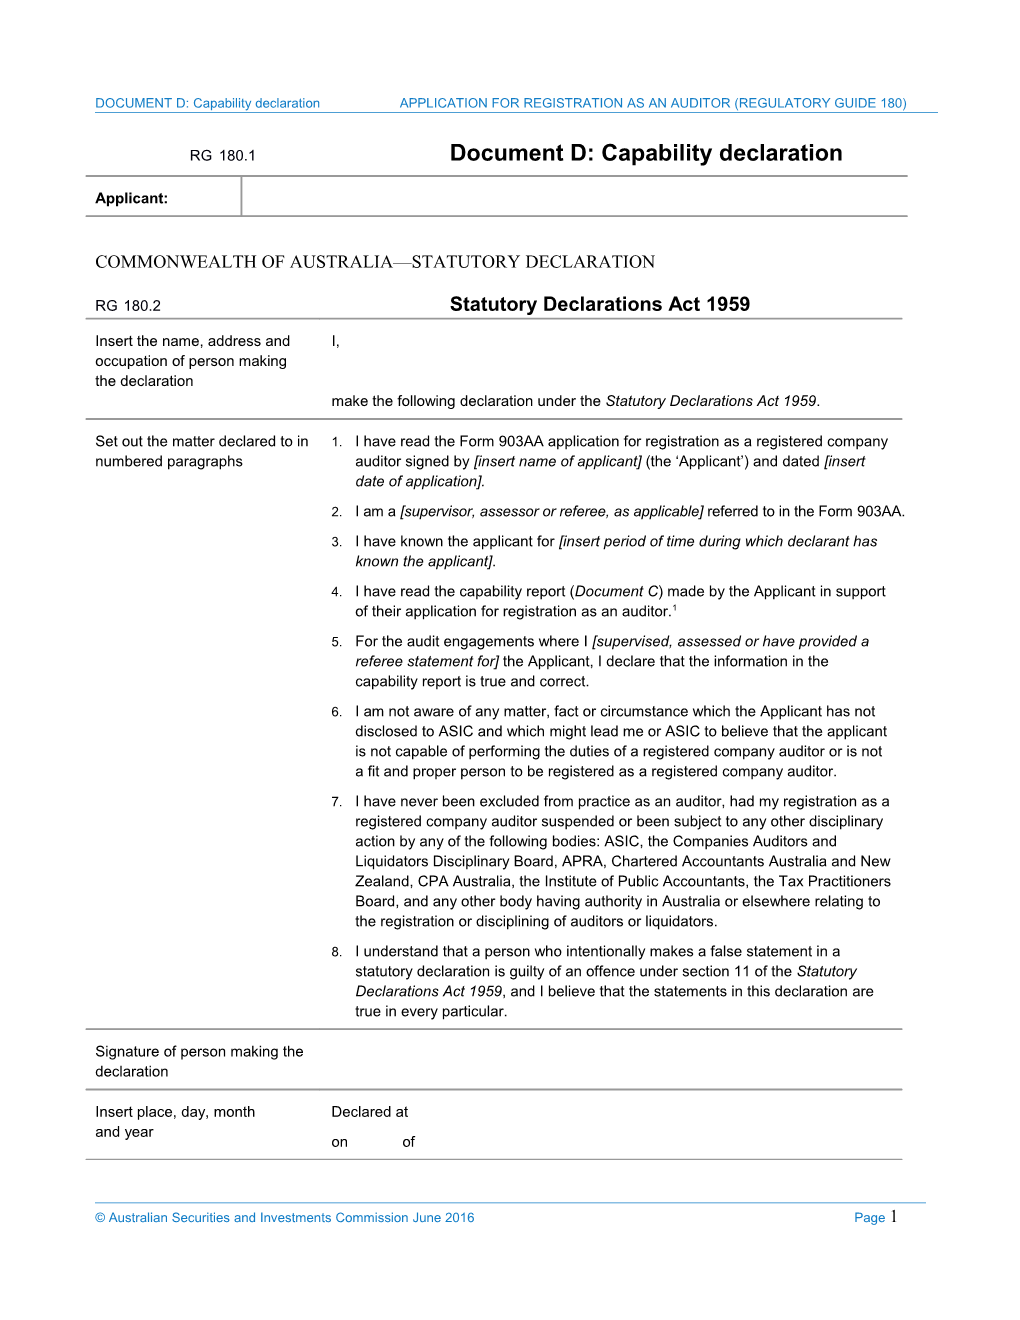 Document D: Capability Declaration Application for Registration As an Auditor (Regulatory